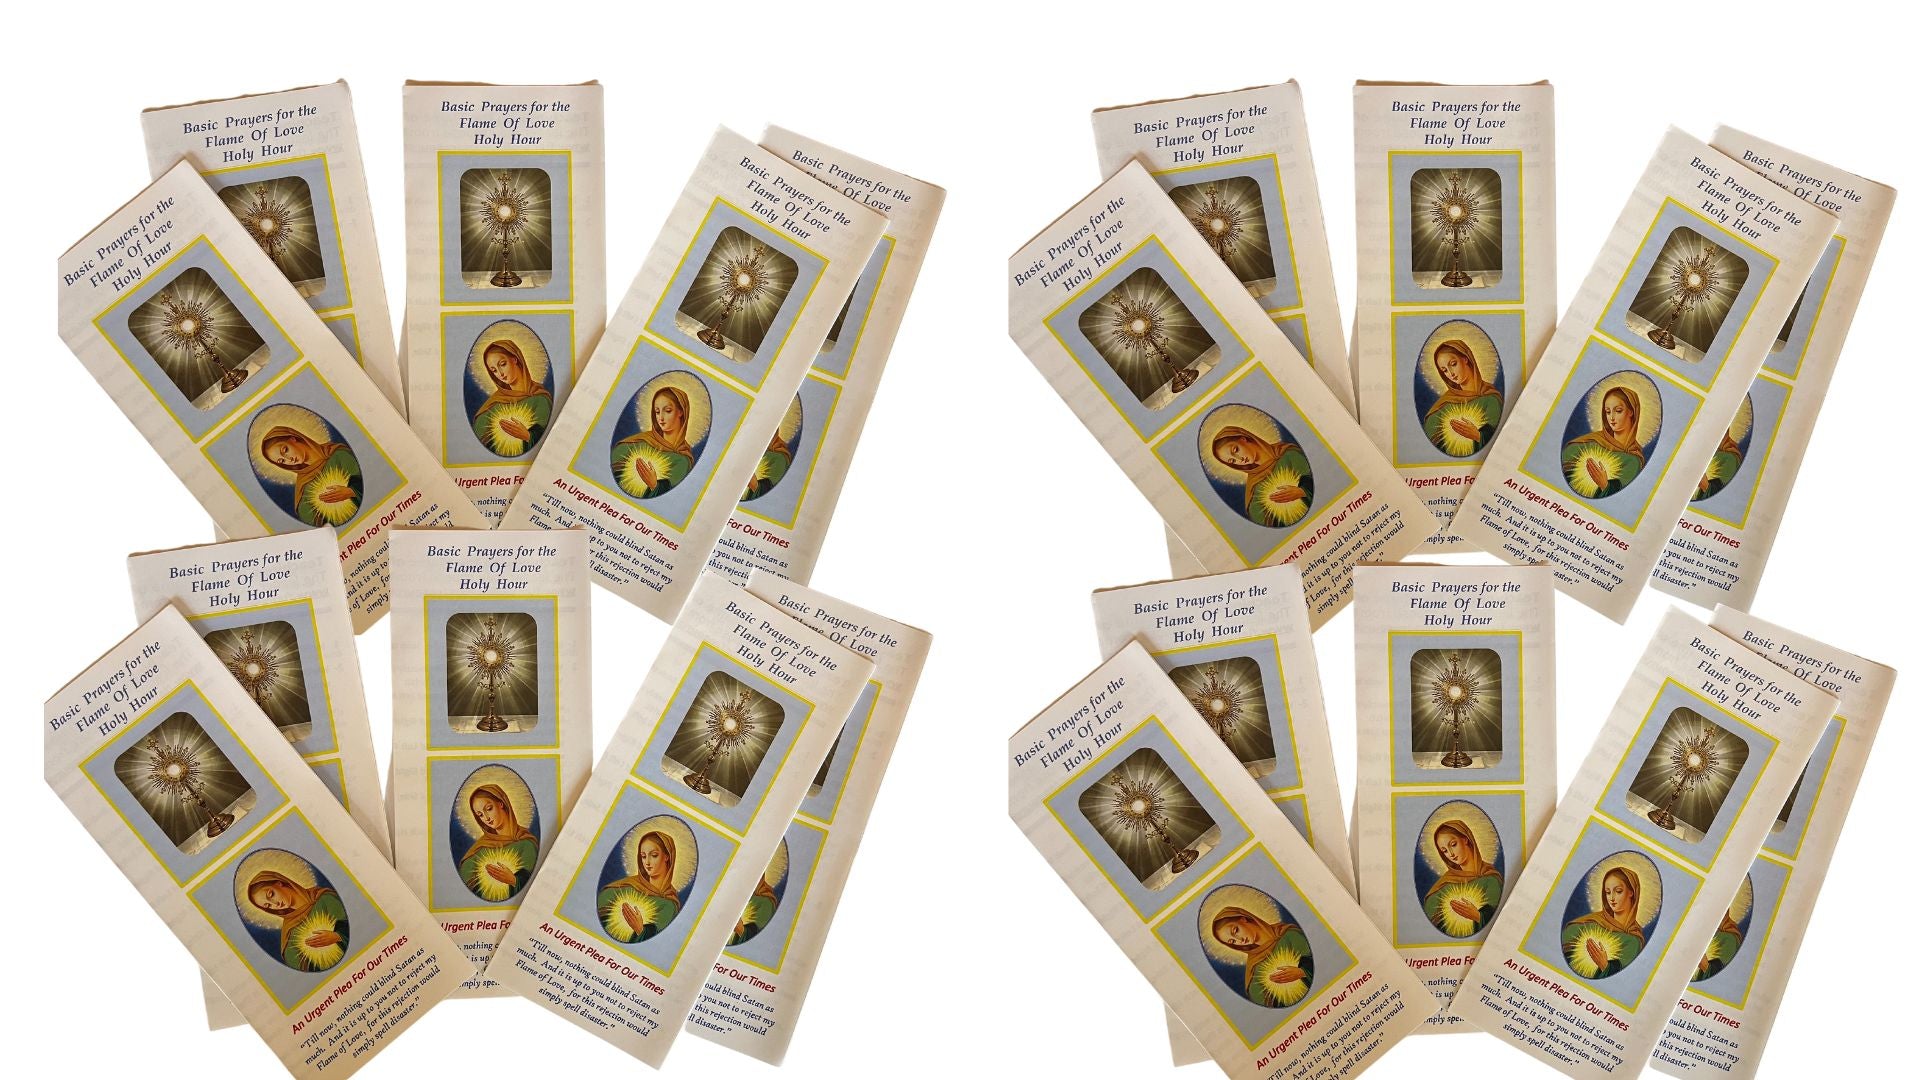 Flame of Love Holy Hour Trifold Packages - Bob and Penny Lord